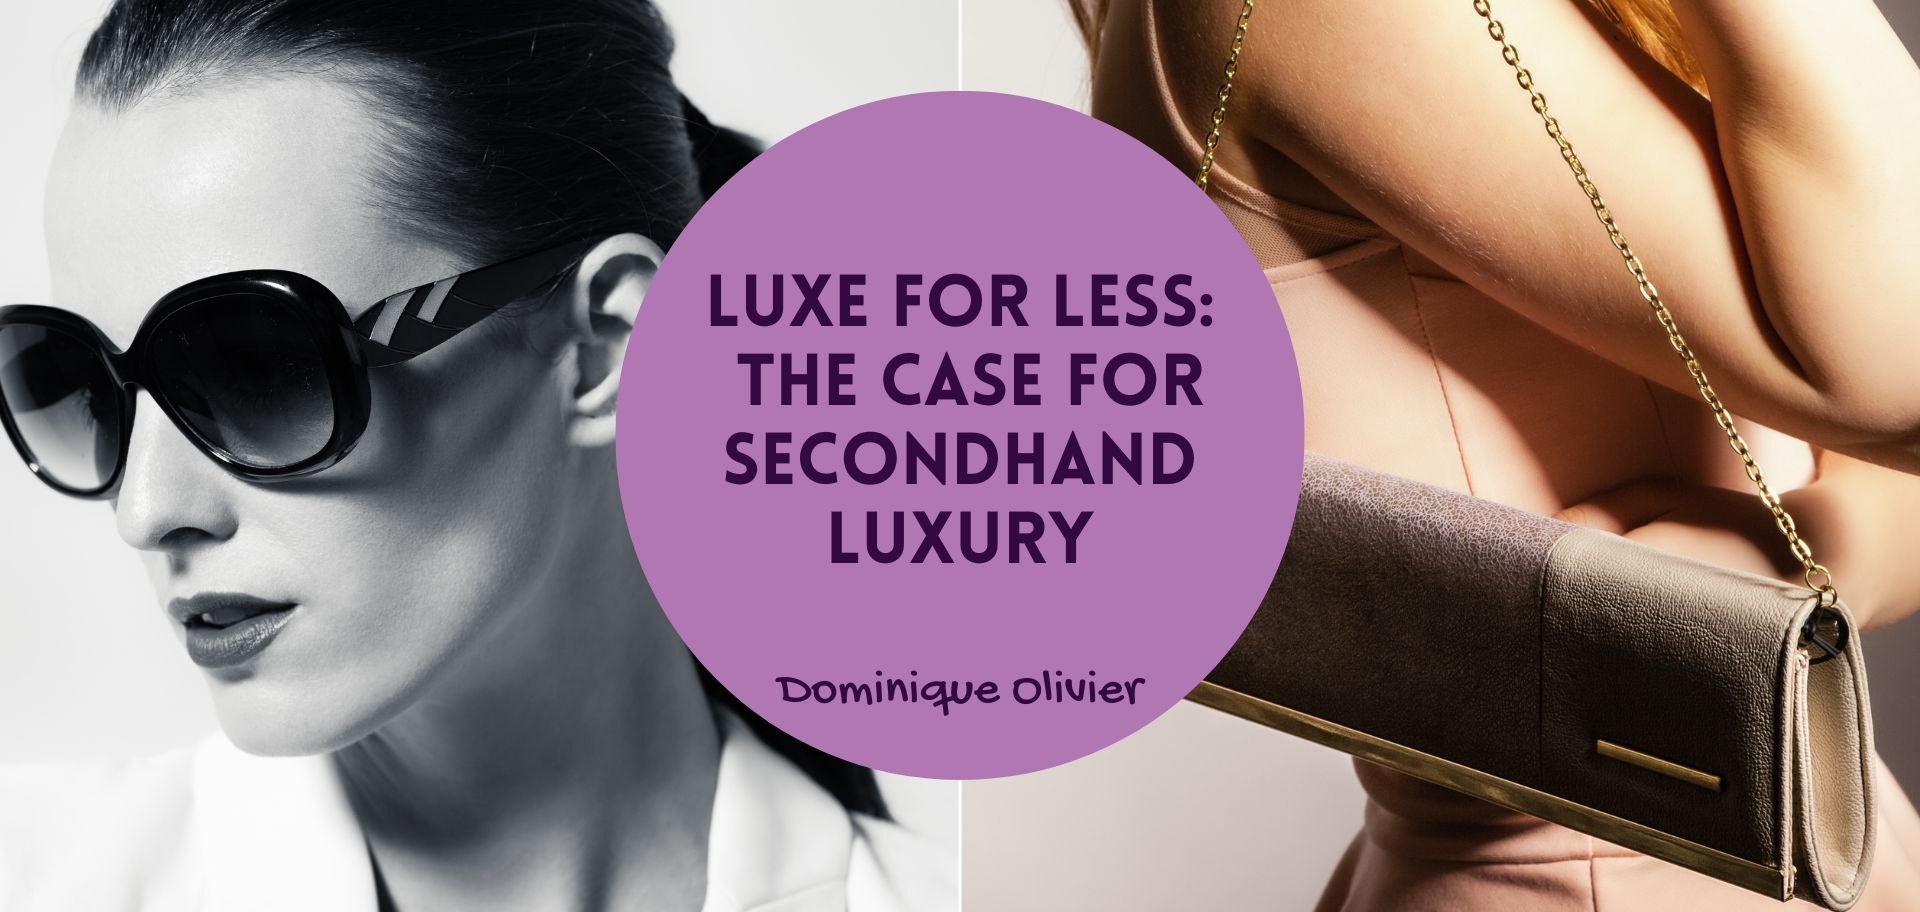 Luxe for less: the case for secondhand luxury